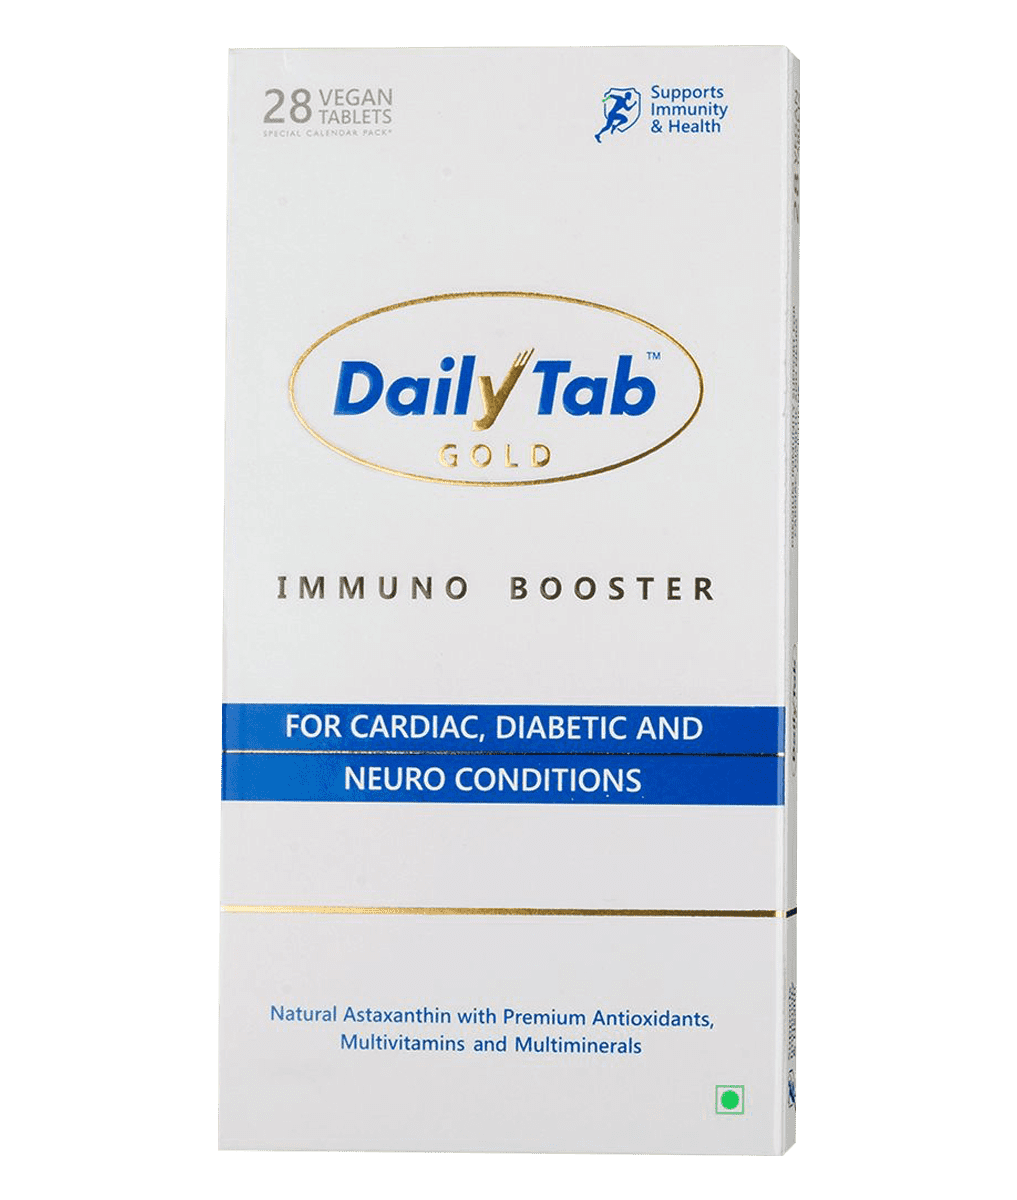 Immuno Booster Made for Everyone